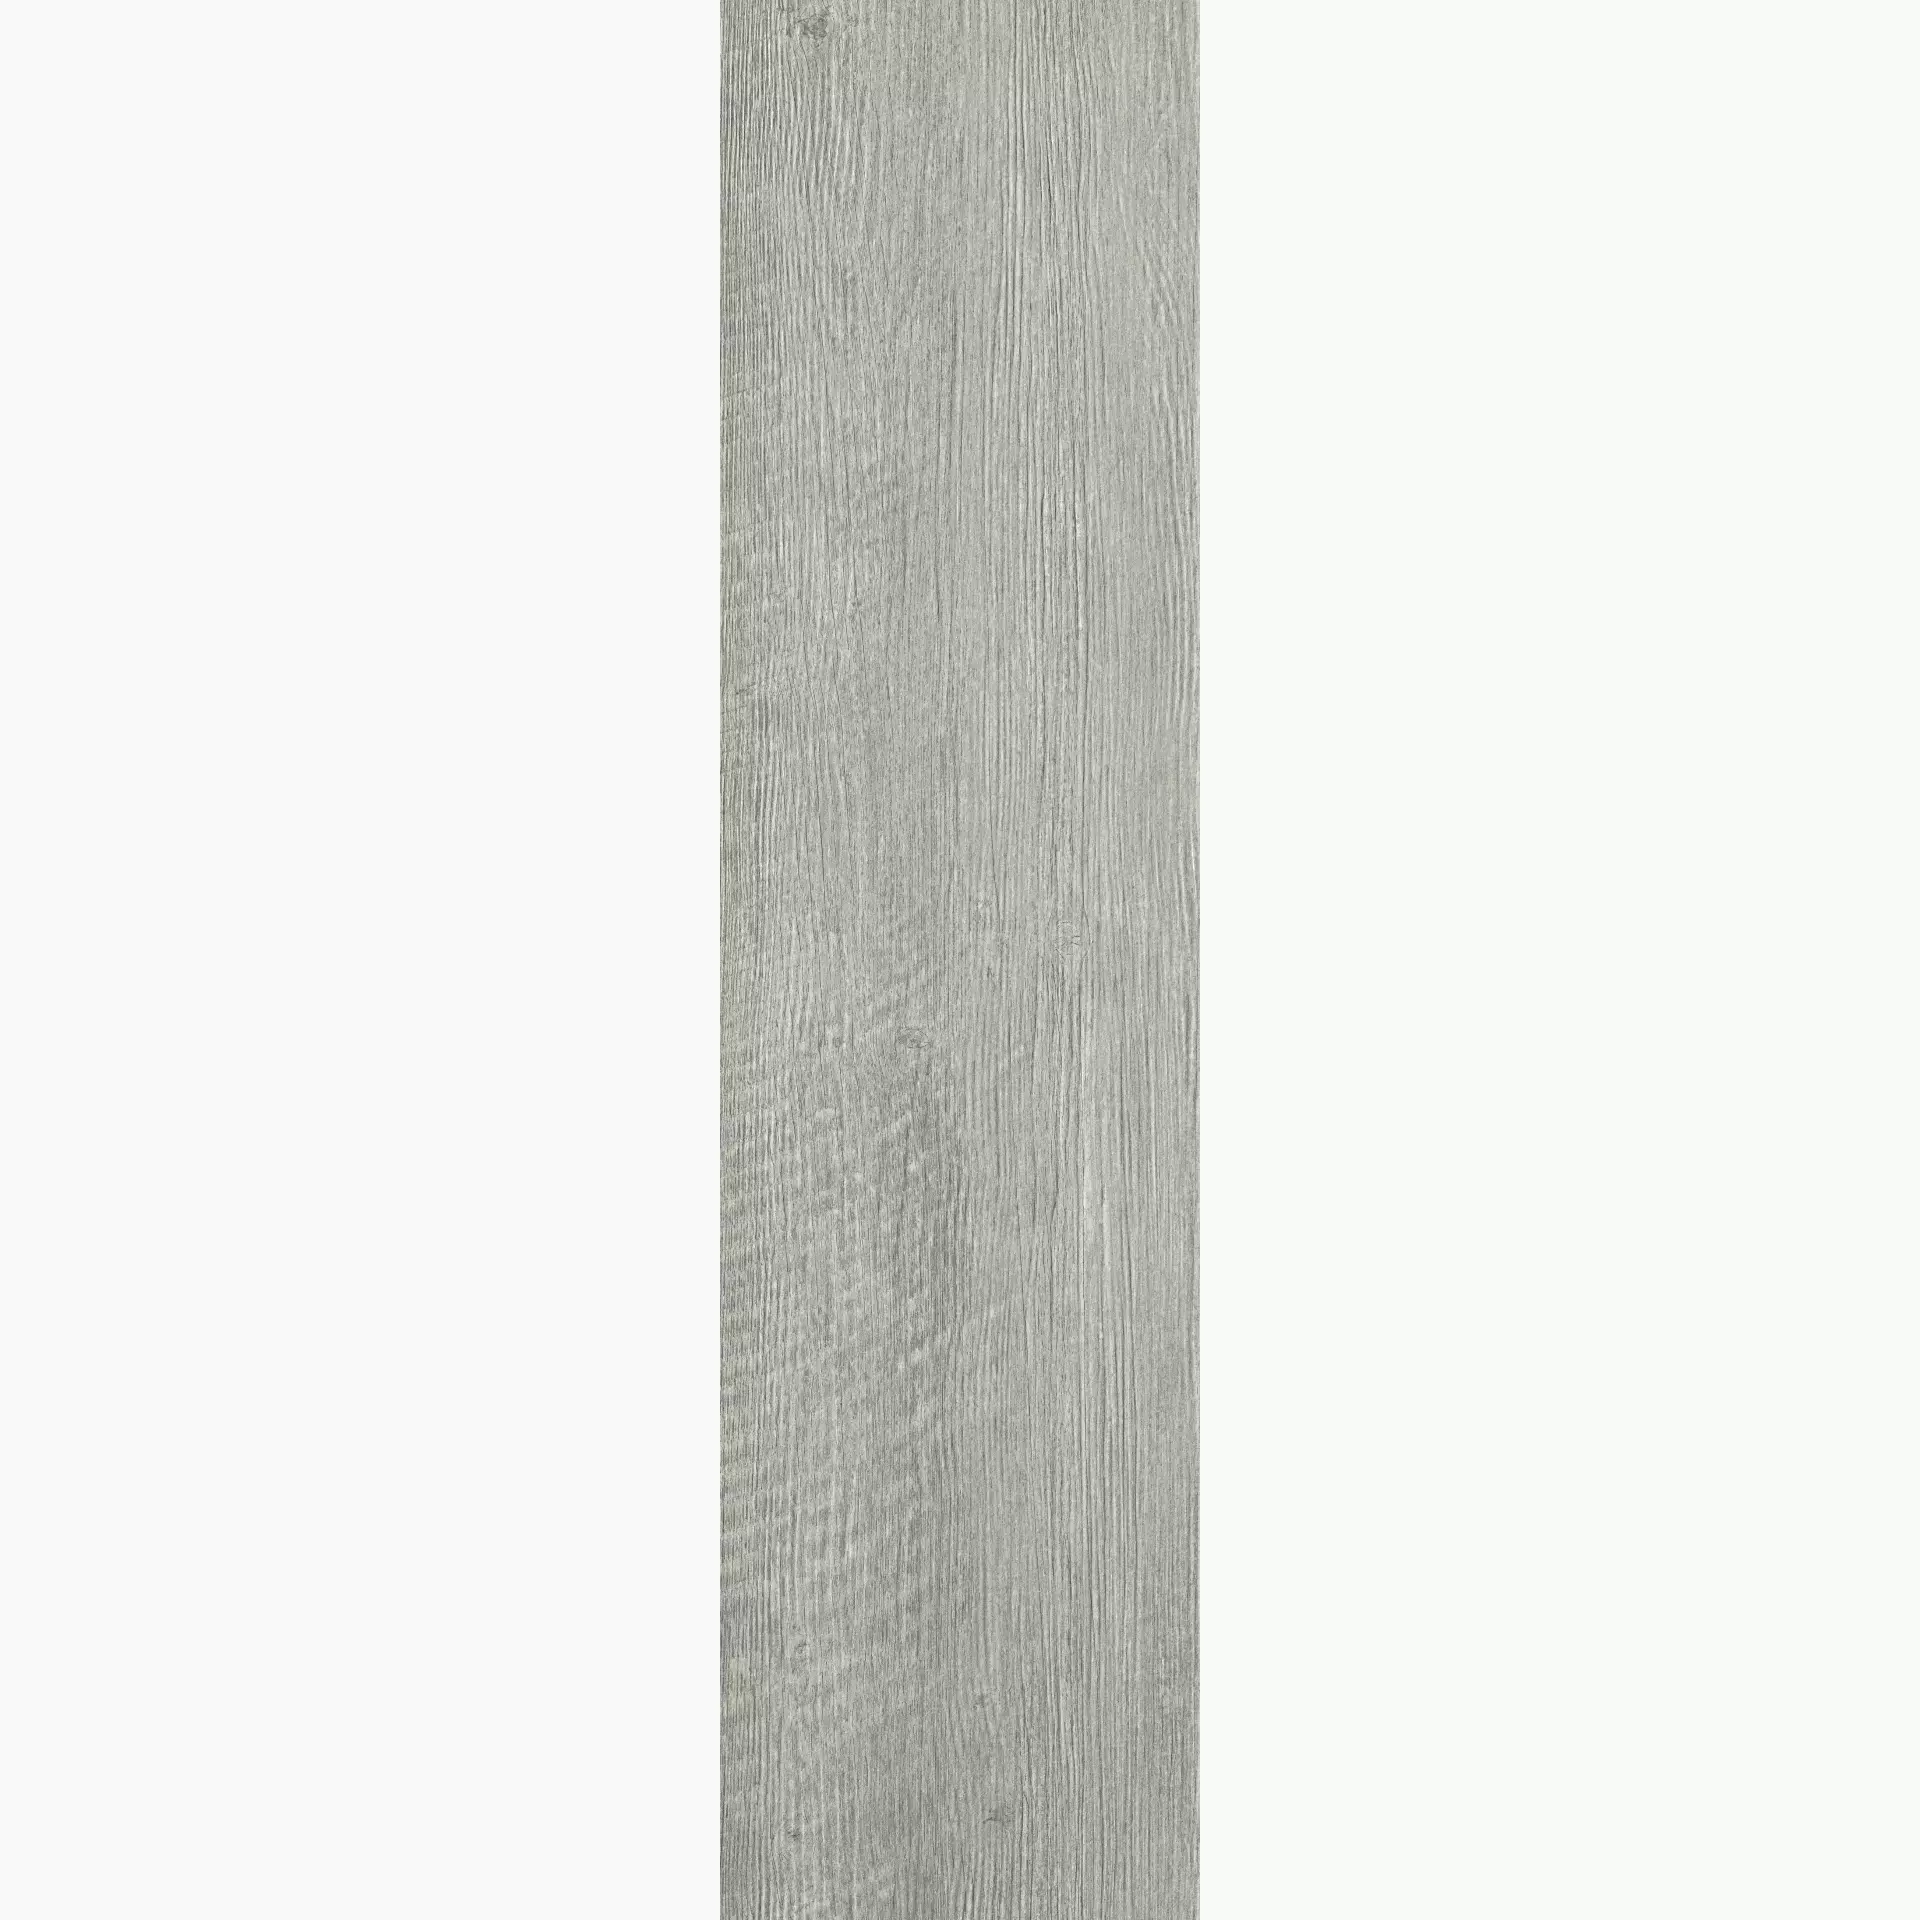 Serenissima Norway Natural Feel Naturale 1050647 30x120cm rectified 9,5mm